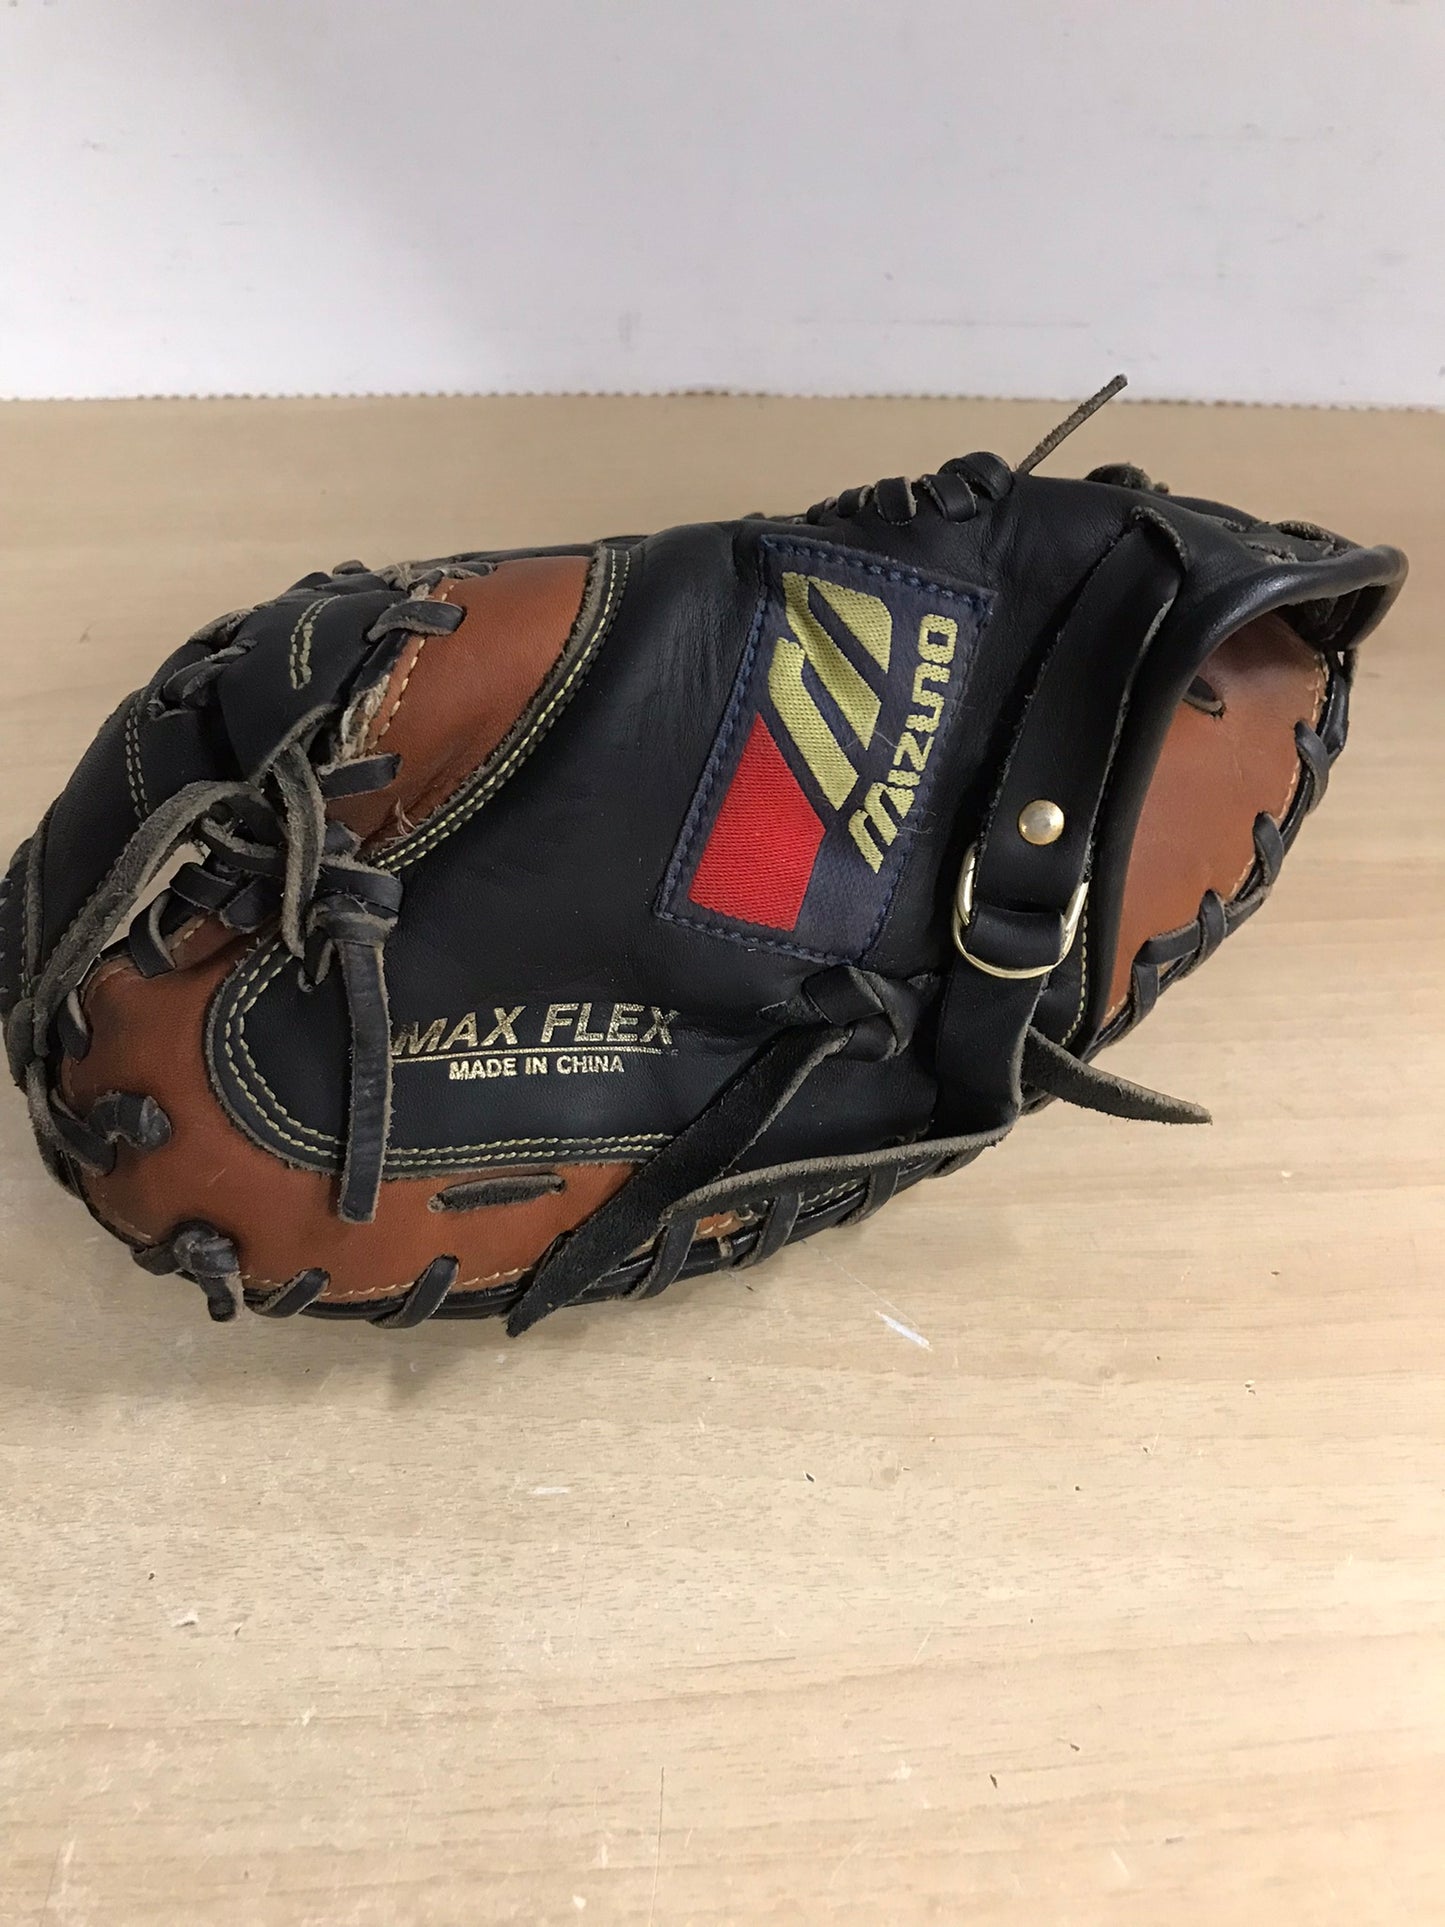 Baseball Catchers Mitt Mizuno Professional Youth Large Soft Leather Excellent Fits Right Hand